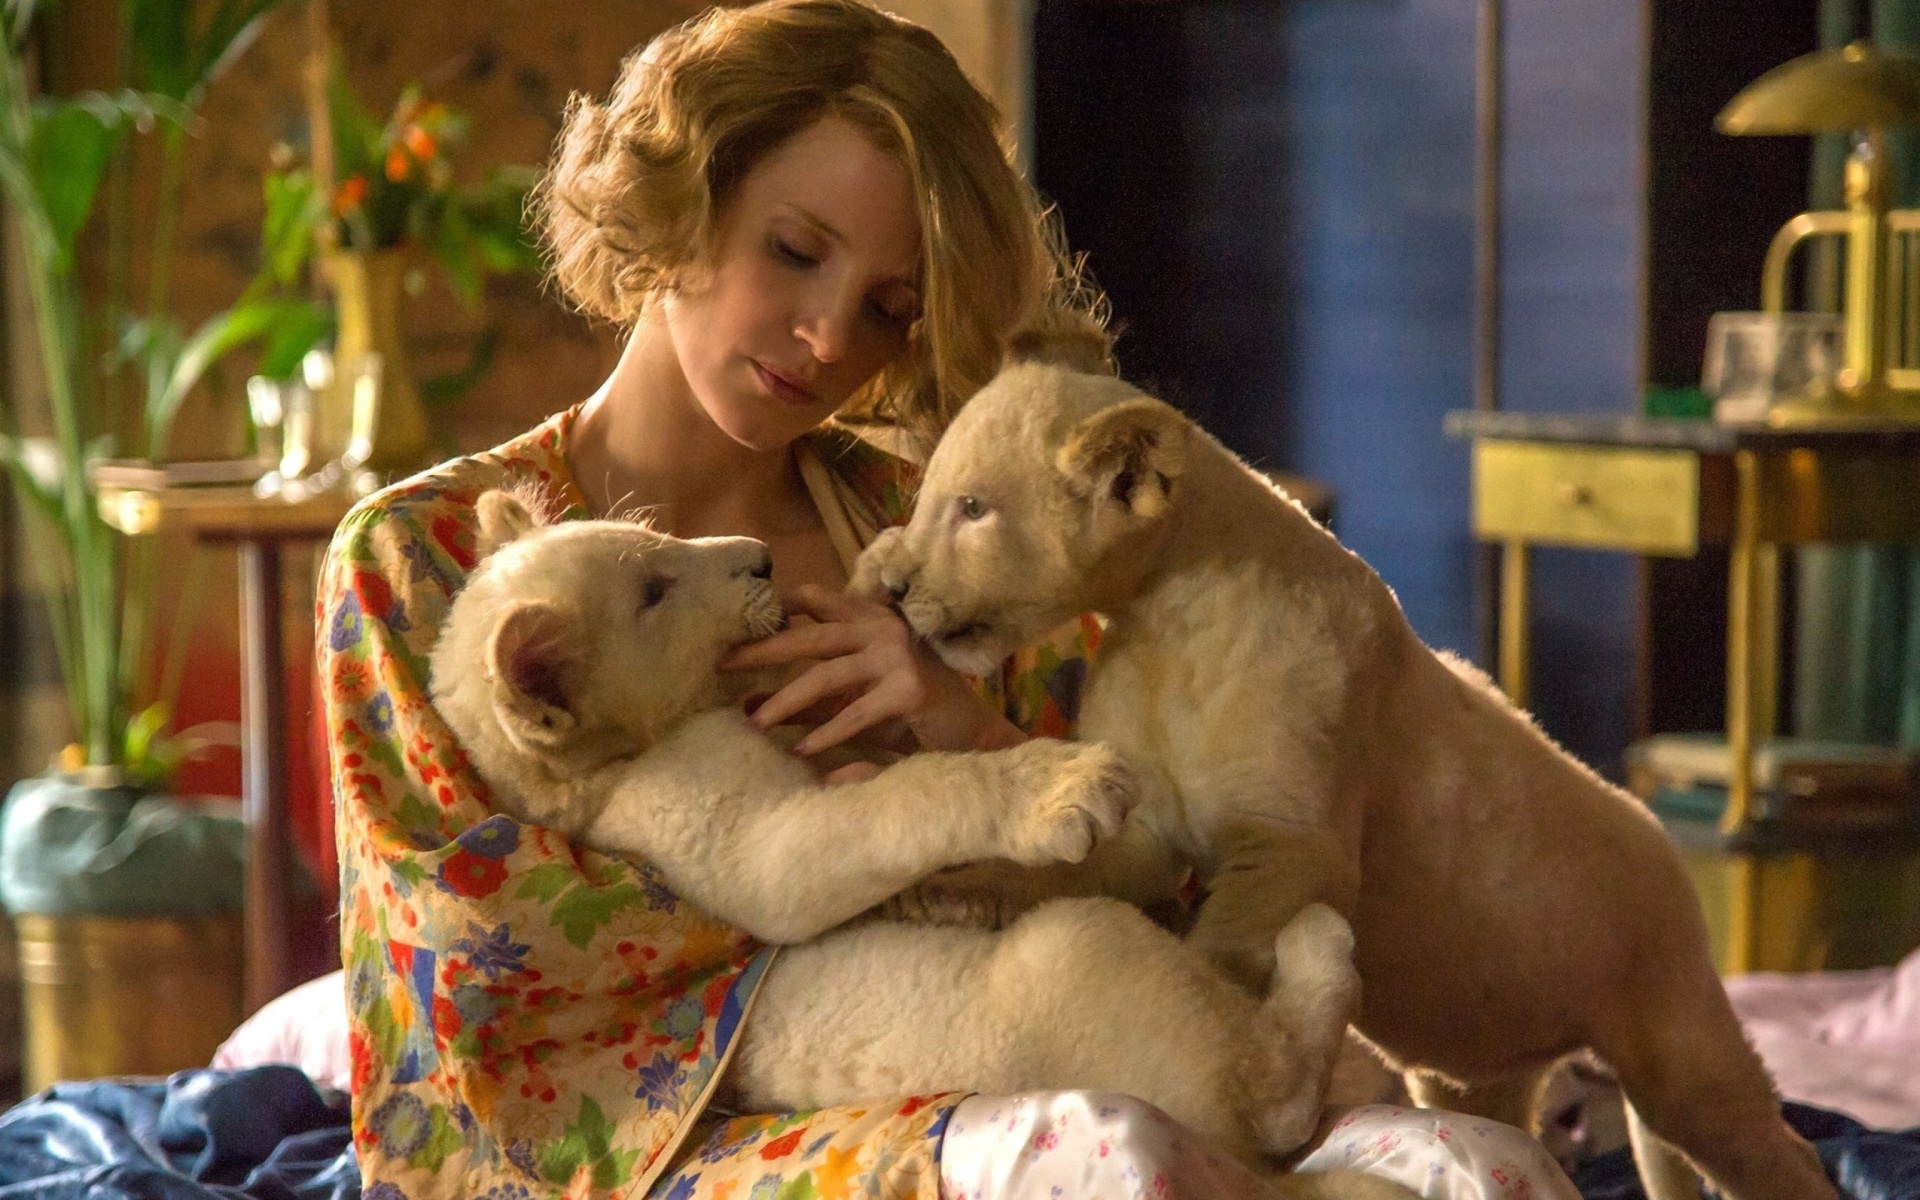 The Zookeepers Wife Film with Jessica Chastain screenshot #1 1920x1200